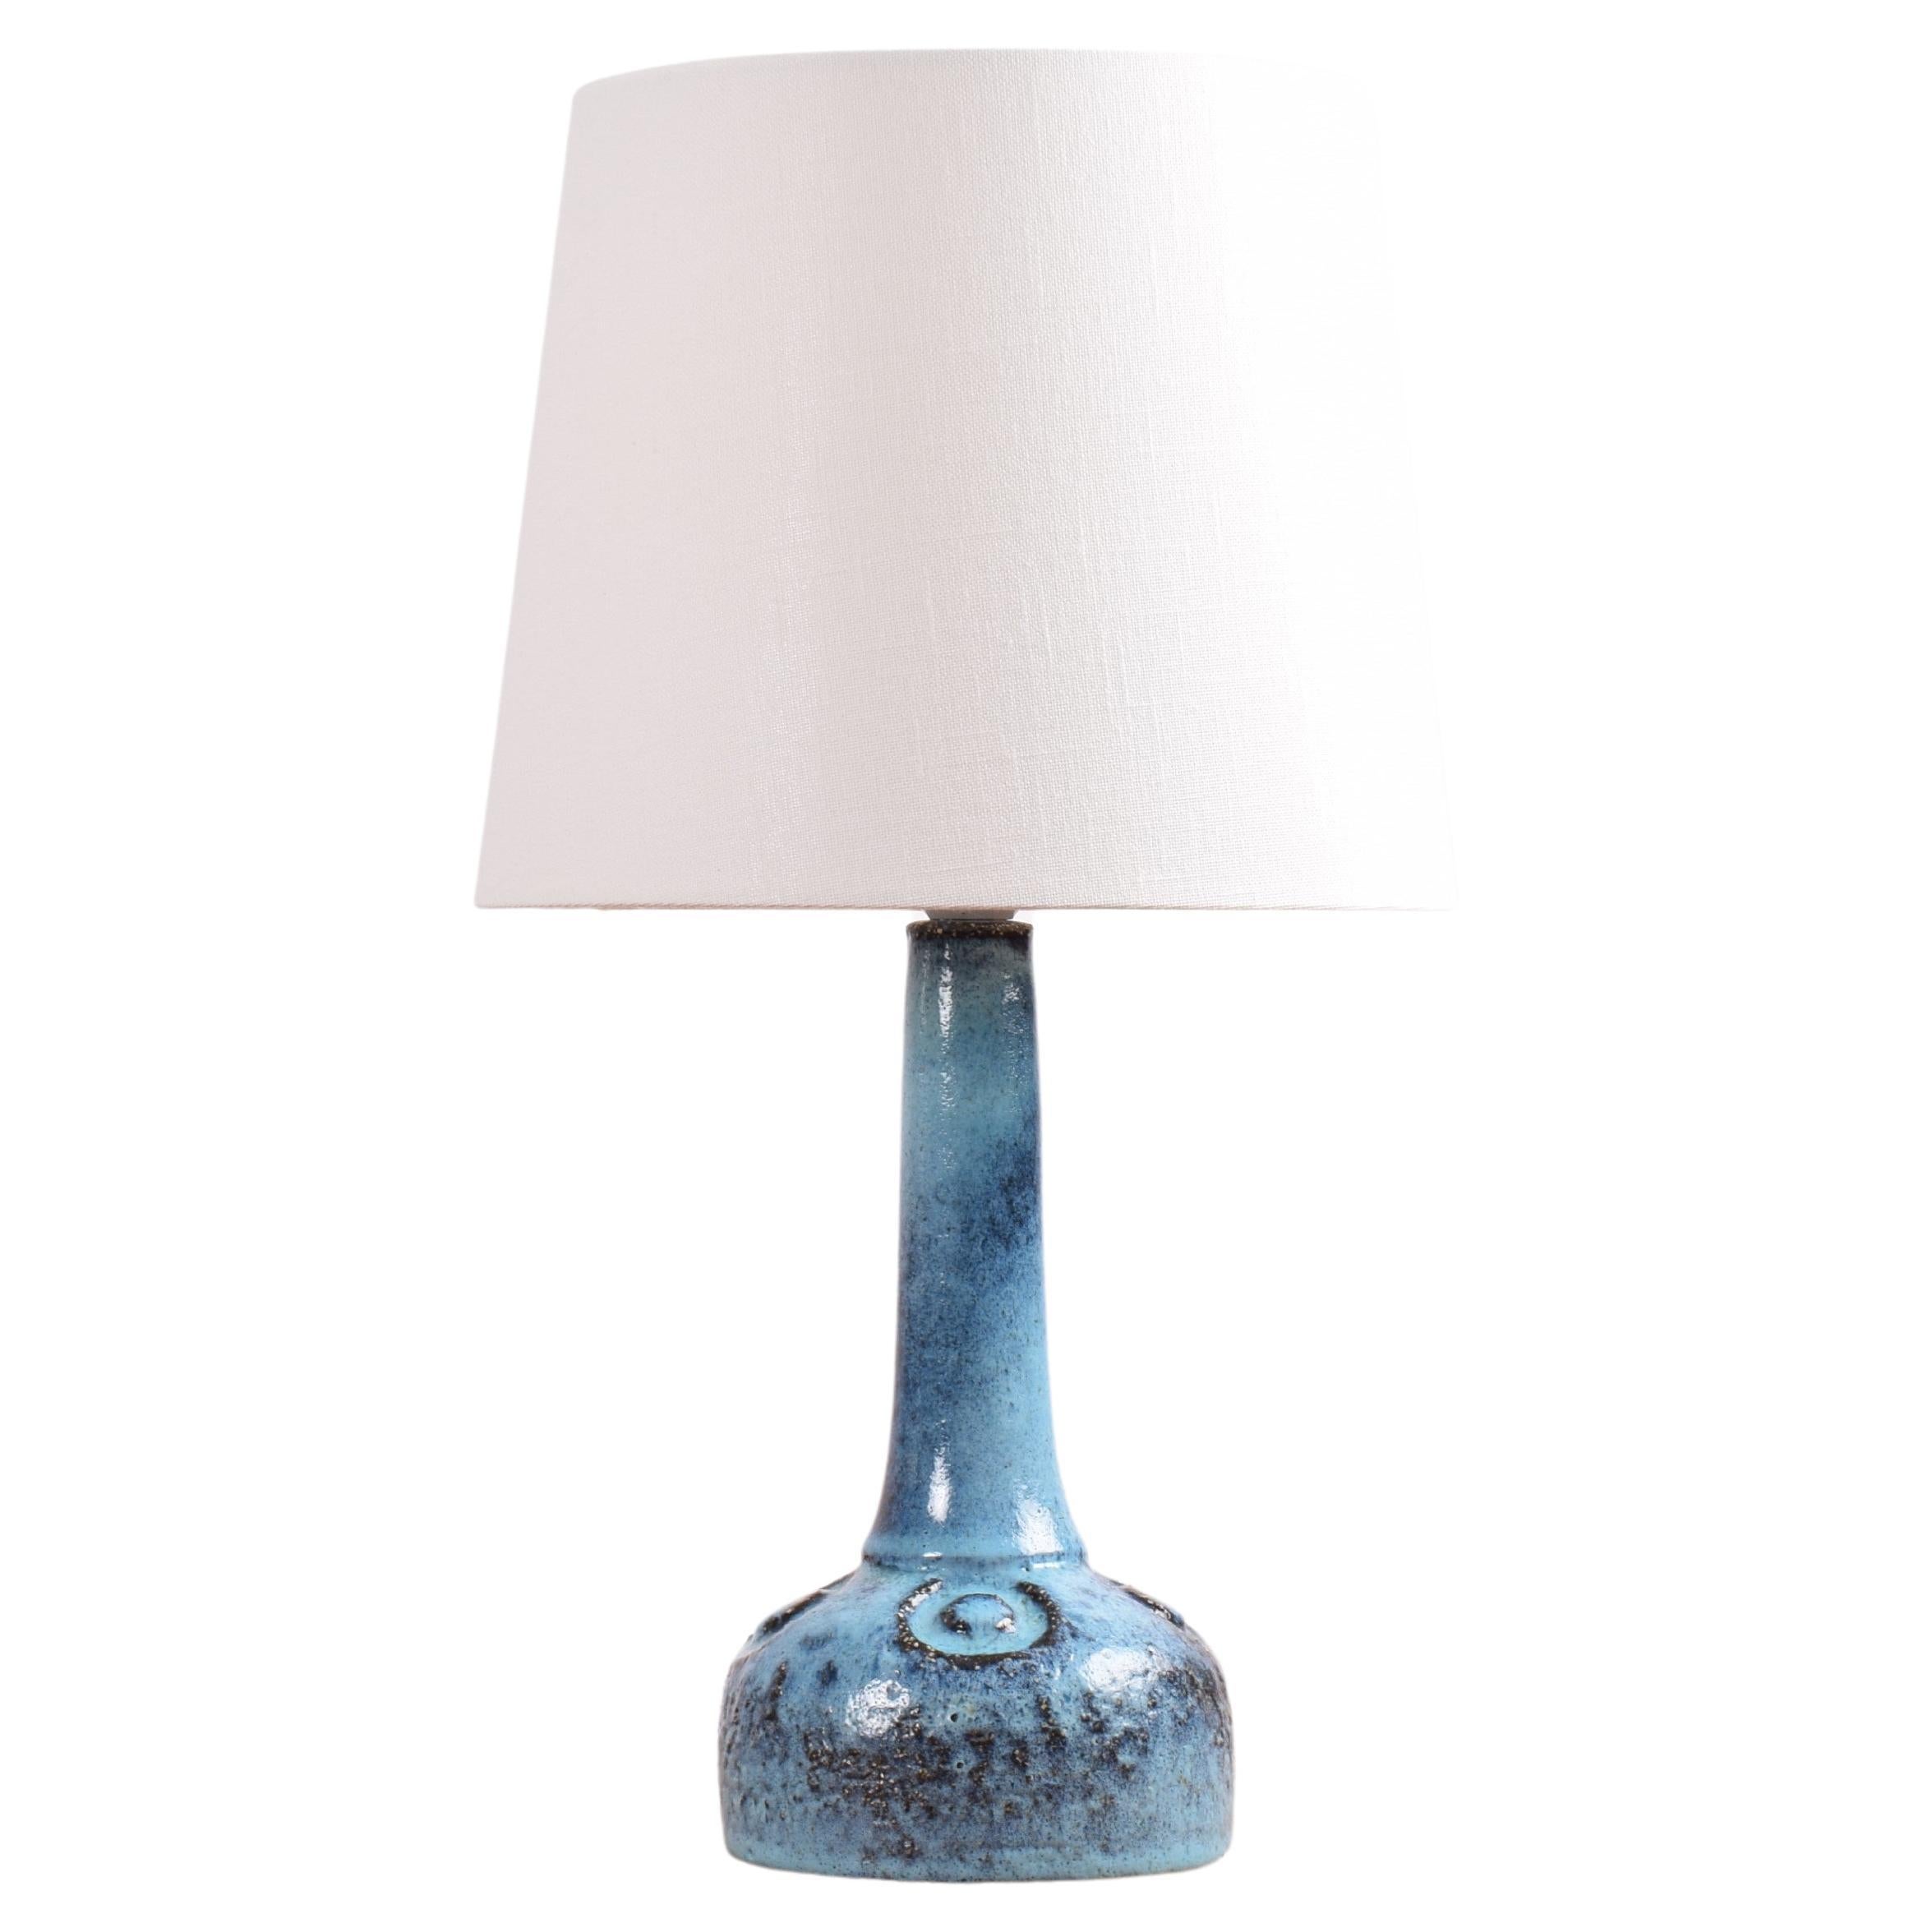 Danish Brutalist Ceramic Table Lamp Bright Blue by Sejer Unic, Mid-Century 1970s